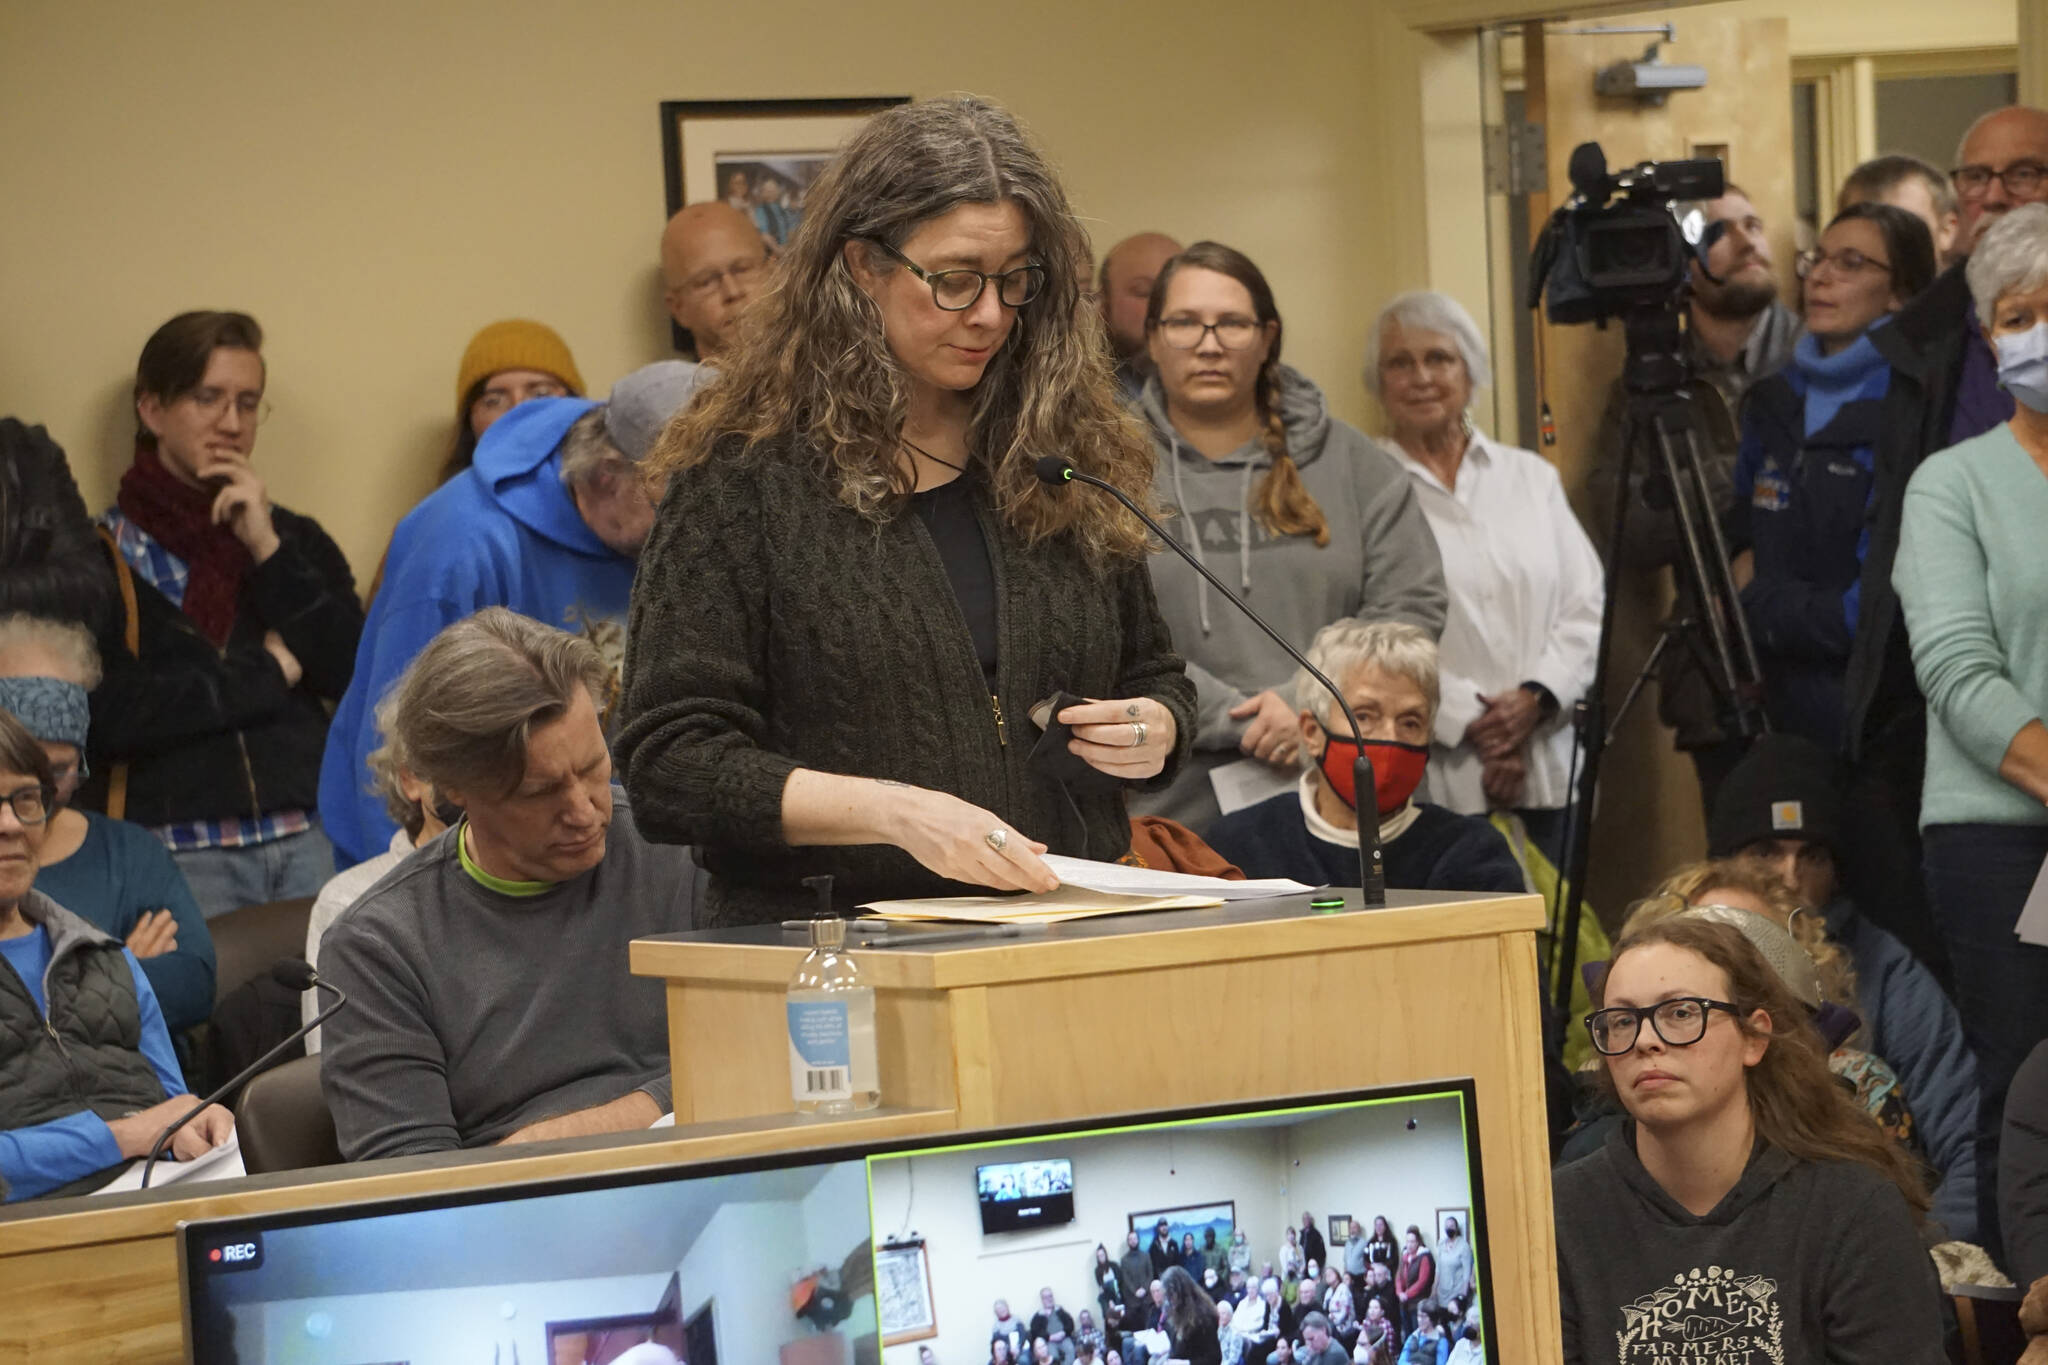 Poet Erin Hollowell speaks at the meeting of the Library Advisory Board on Nov. 15, 2022, in the Cowles Council Chambers at Homer City Hall in Homer, Alaska. (Photo by Michael Armstrong/Homer News)